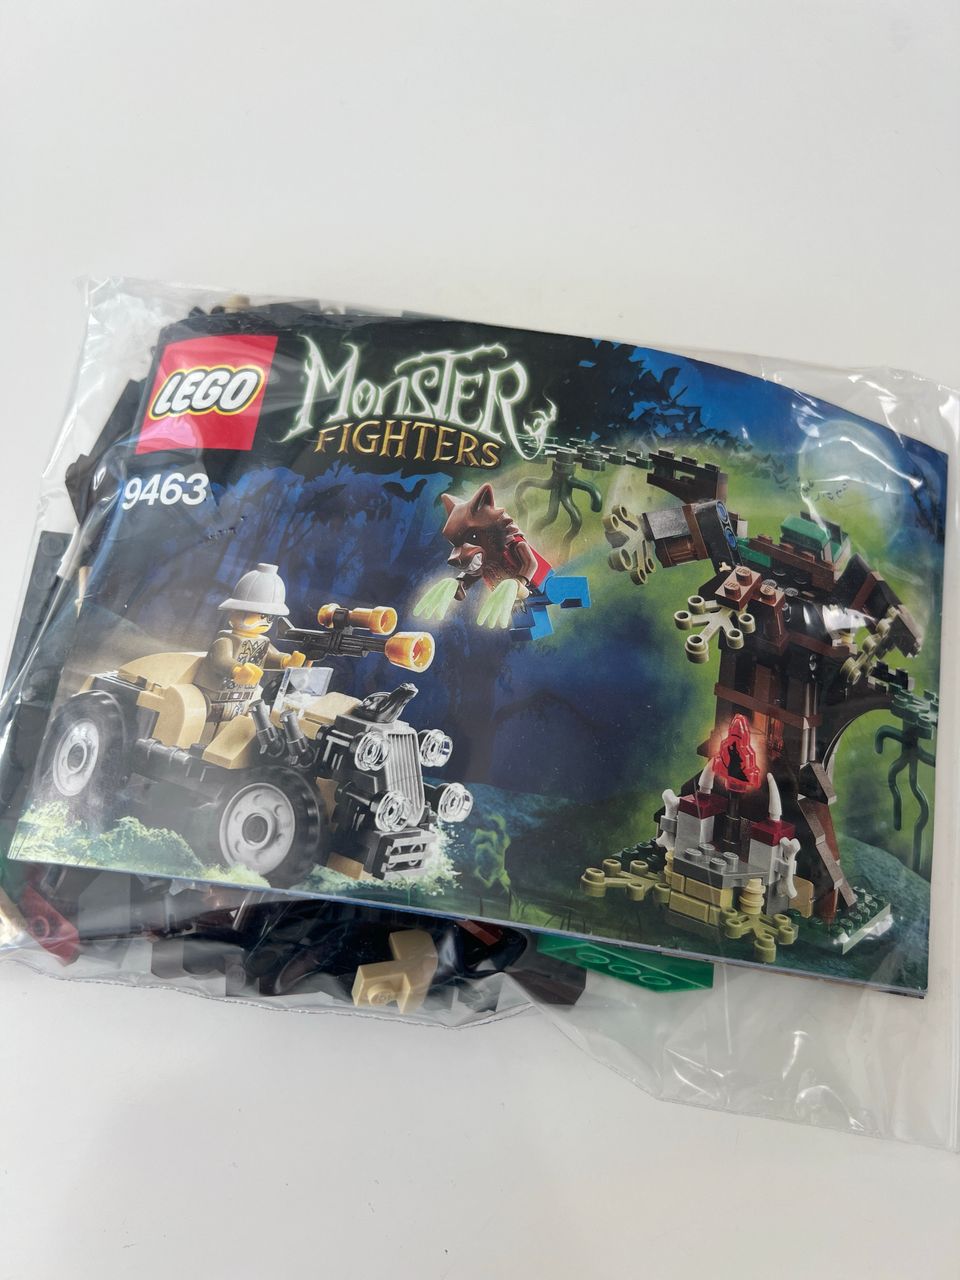 Lego Monster Fighters 9463